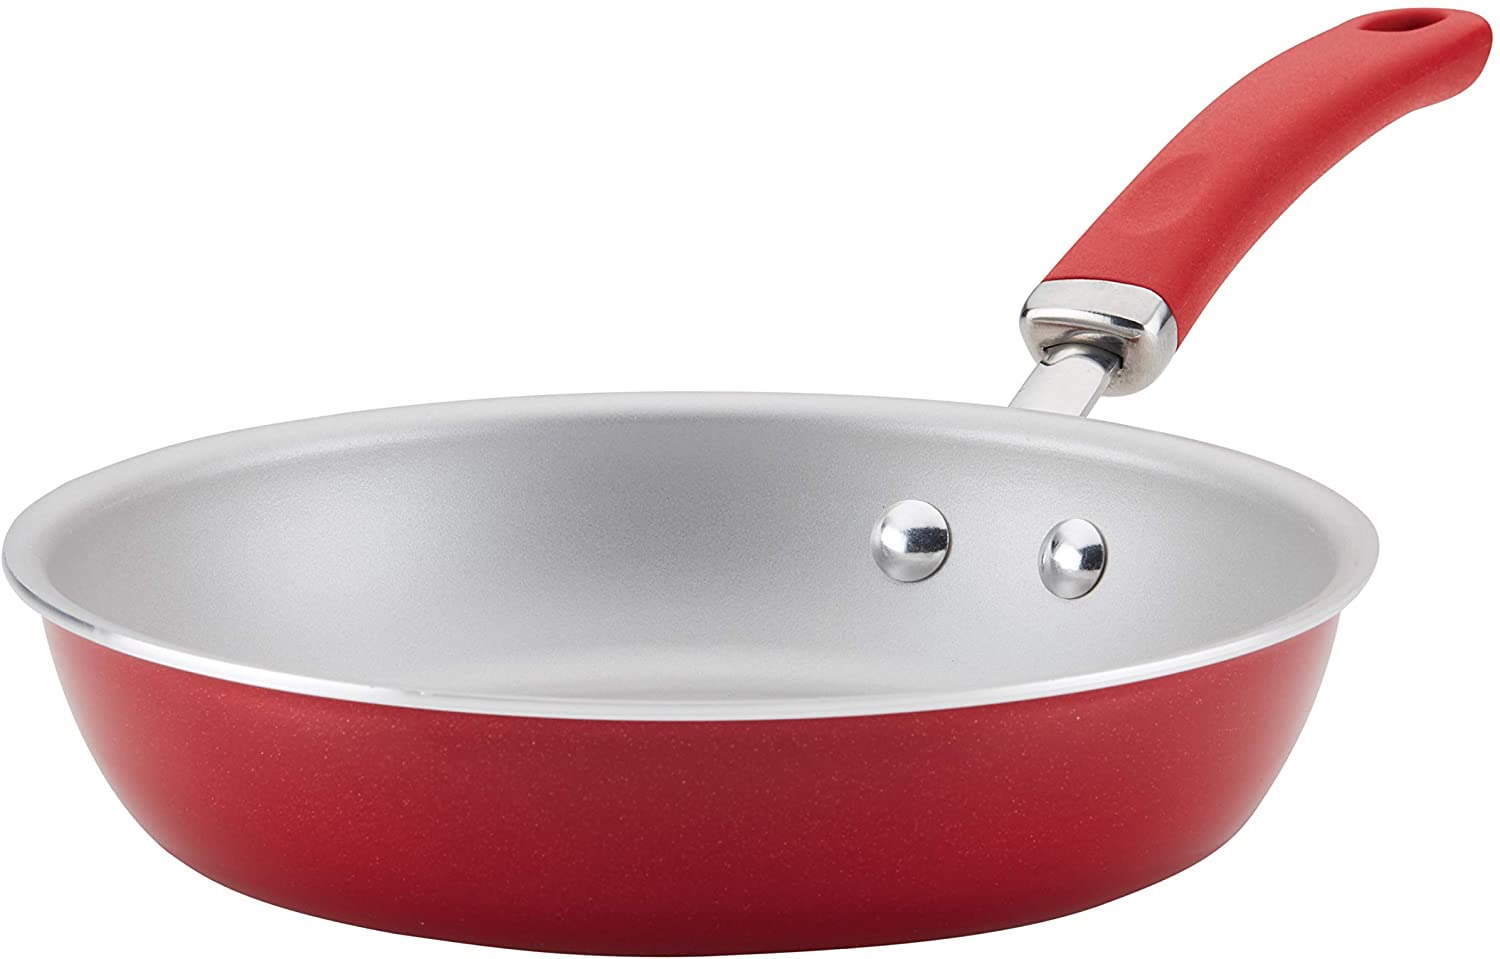 Rachael Ray Red Create Delicious Aluminum Nonstick Covered 9.5 in Deep Skillet